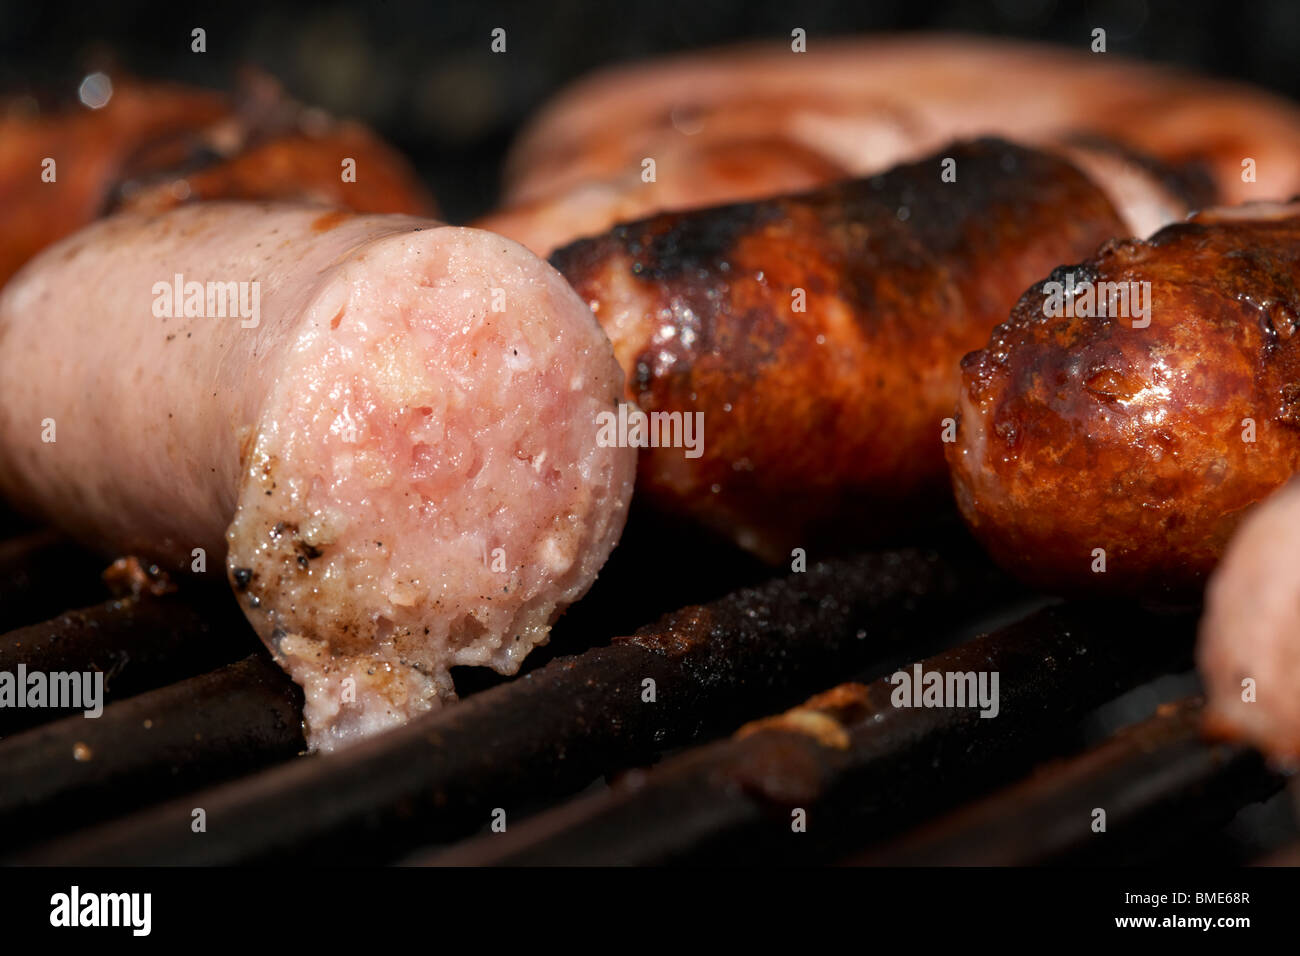 raw uncooked organic fresh irish pork sausages next to fully cooked sausage cooking on a barbeque Stock Photo